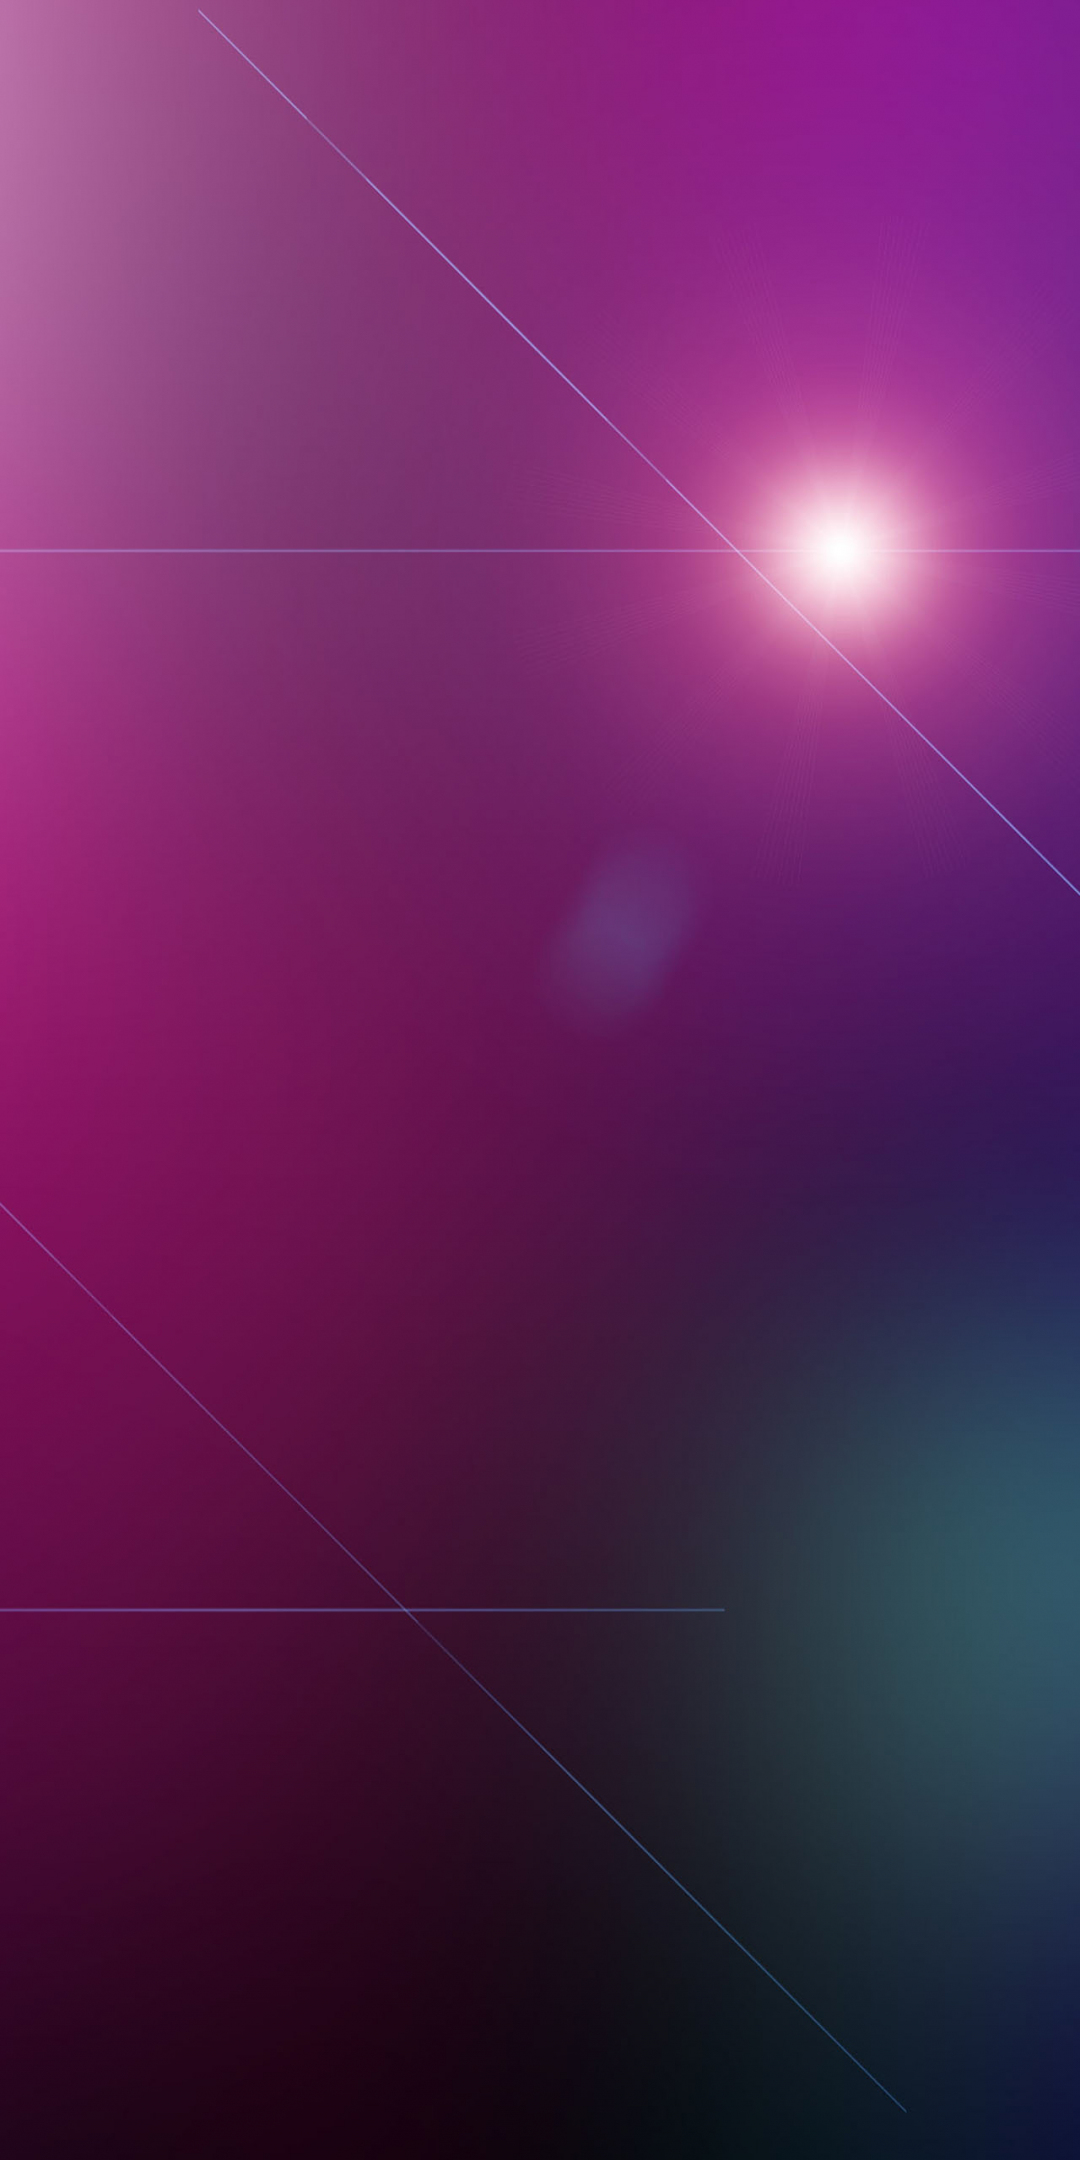 Gradient, pink flare, abstract, 1080x2160 wallpaper